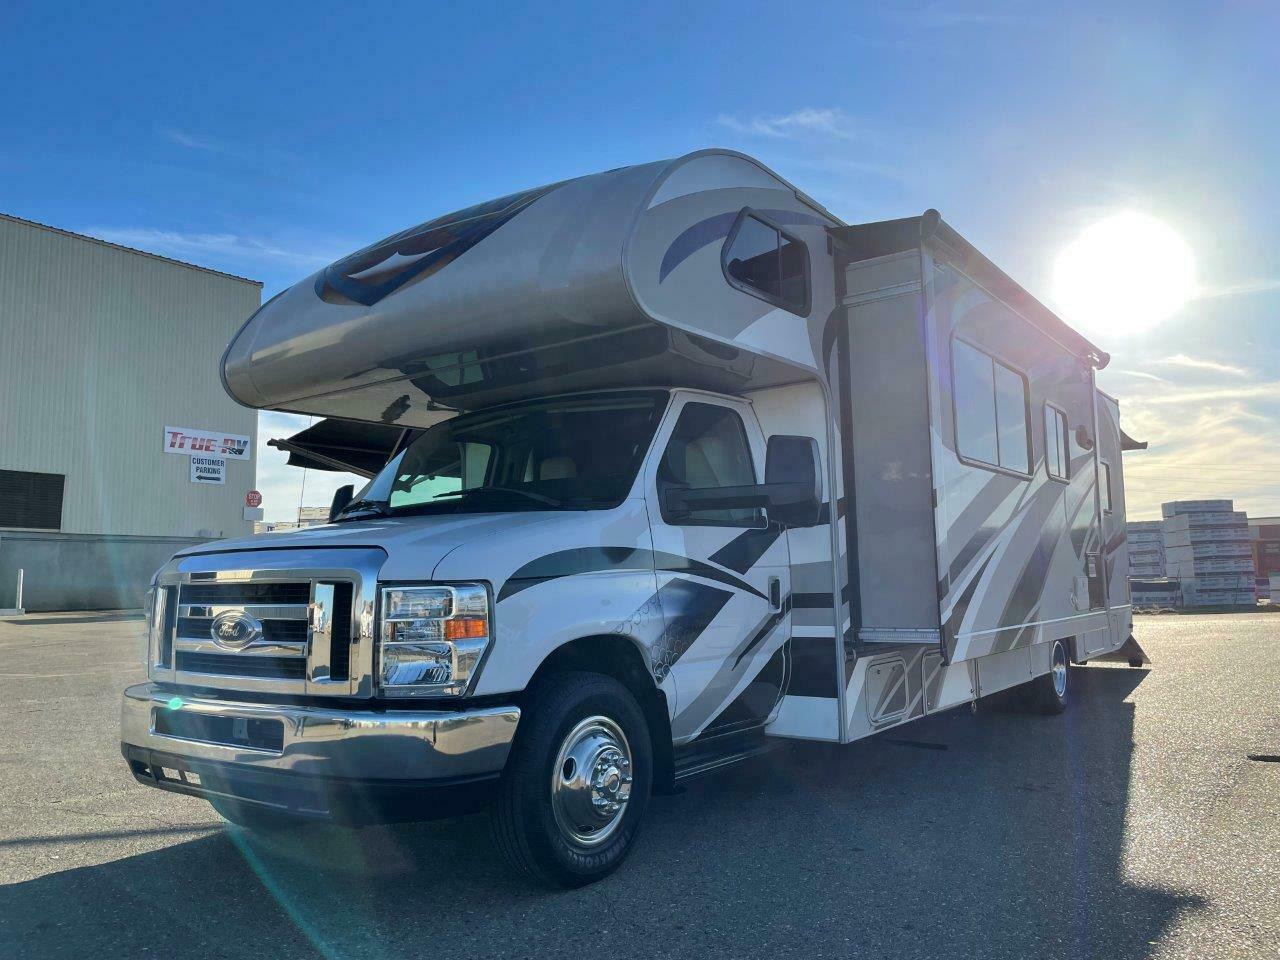 2017 Thor Outlaw 29h Class C Motorhome